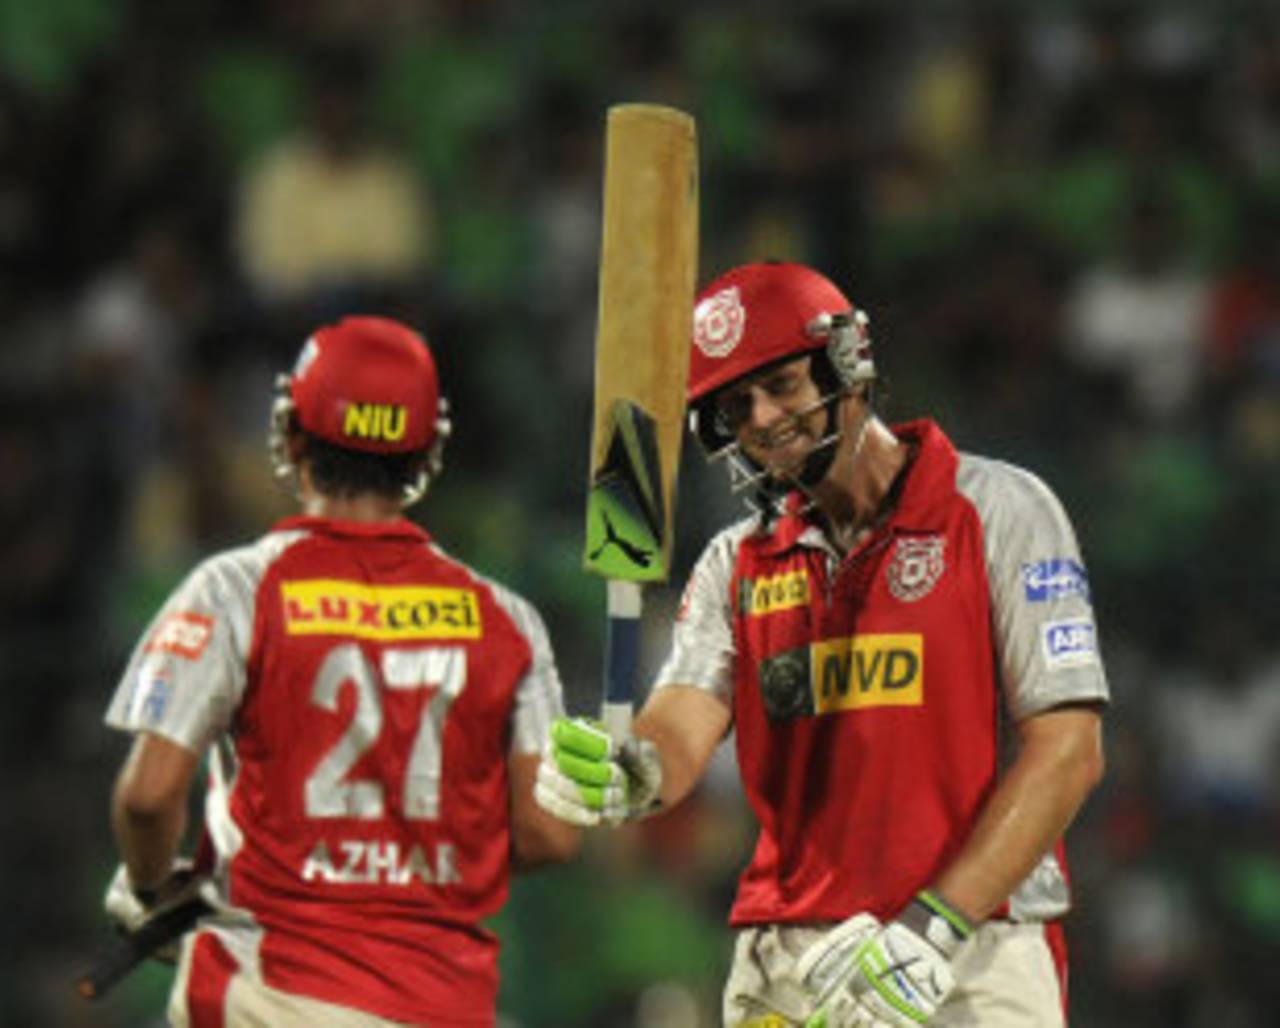 Adam Gilchrist acknowledges the crowd after bringing up his fifty, Royal Challengers Bangalore v Kings XI Punjab, IPL 2013, Bangalore, May 14, 2013